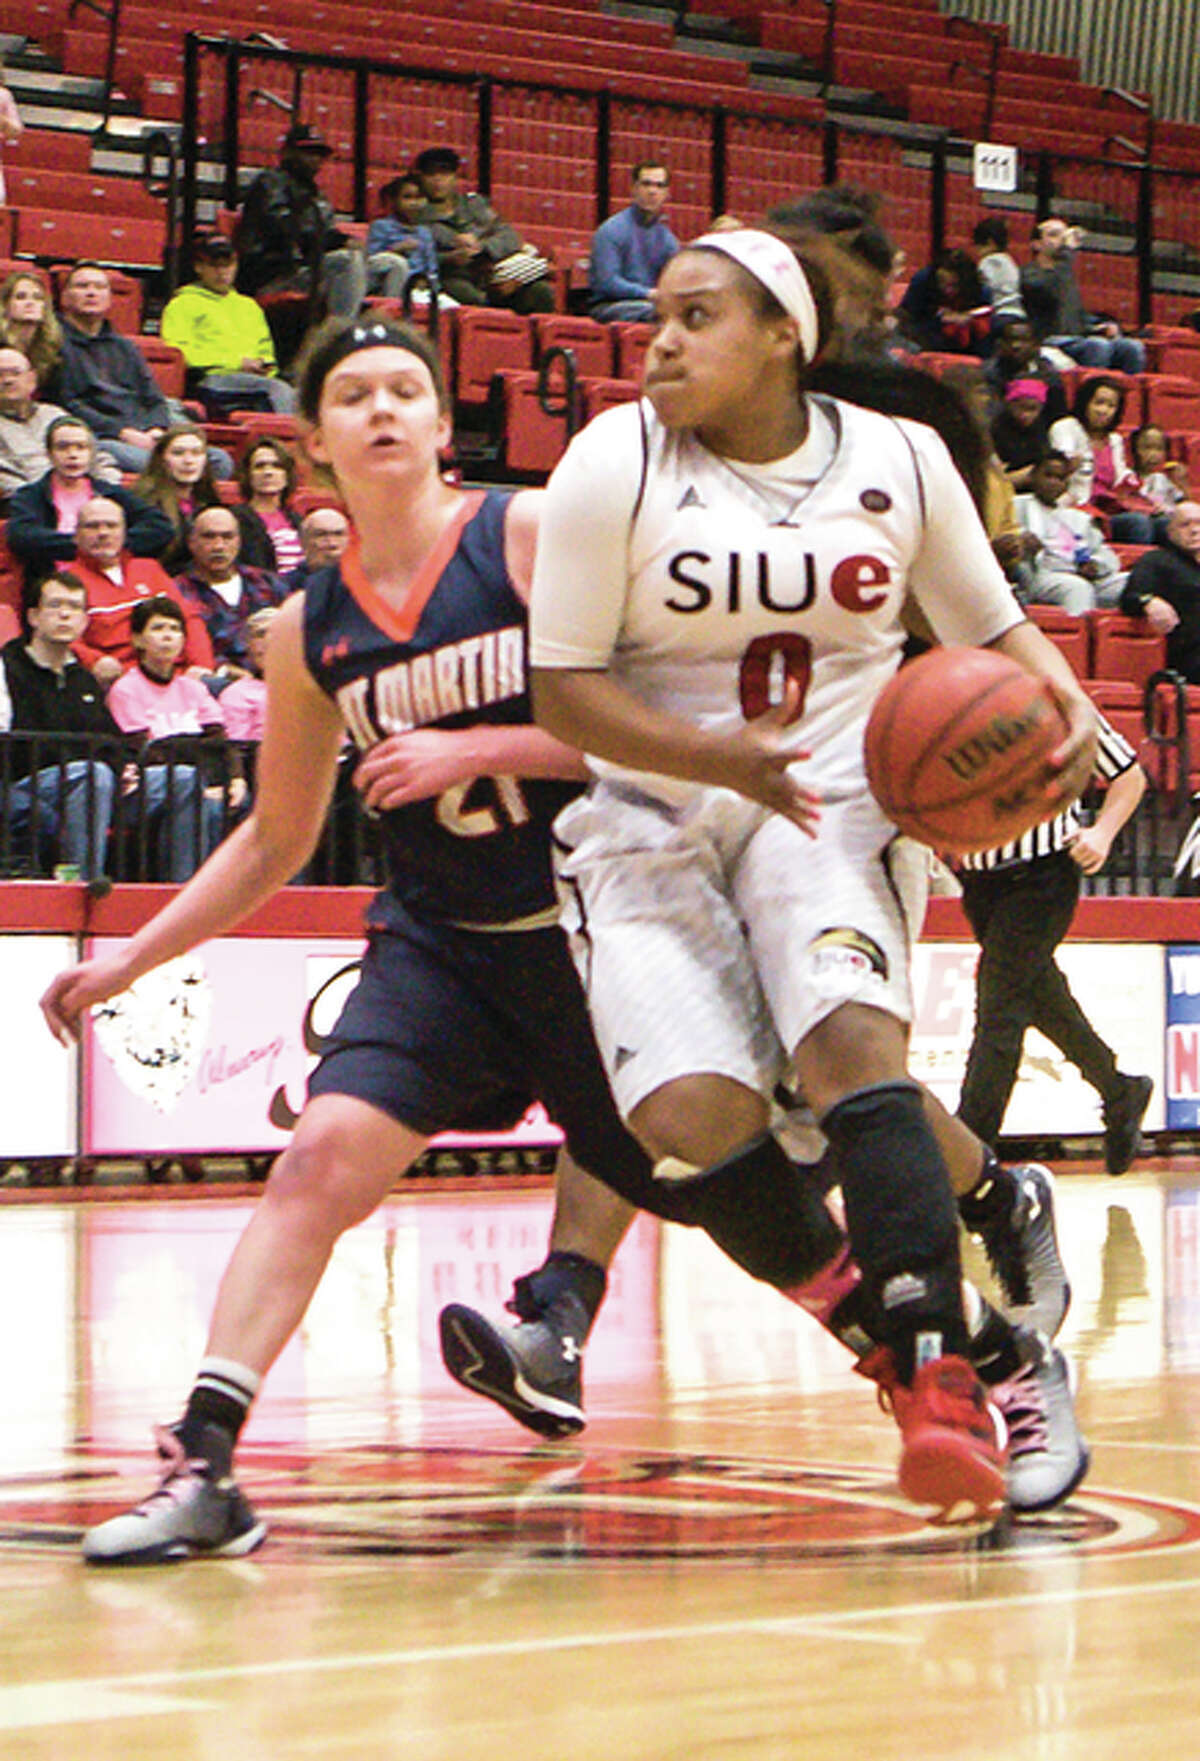 SIUE’s Shronda Butts has been named the Ohio Valley conference Player of the Week after averaging 27.0 points per game in wins over Morehead State and Eastern Kentucky. It is the second OVC award for Butts, who previously was honored as the OVC’s Preseason Player of the Year.